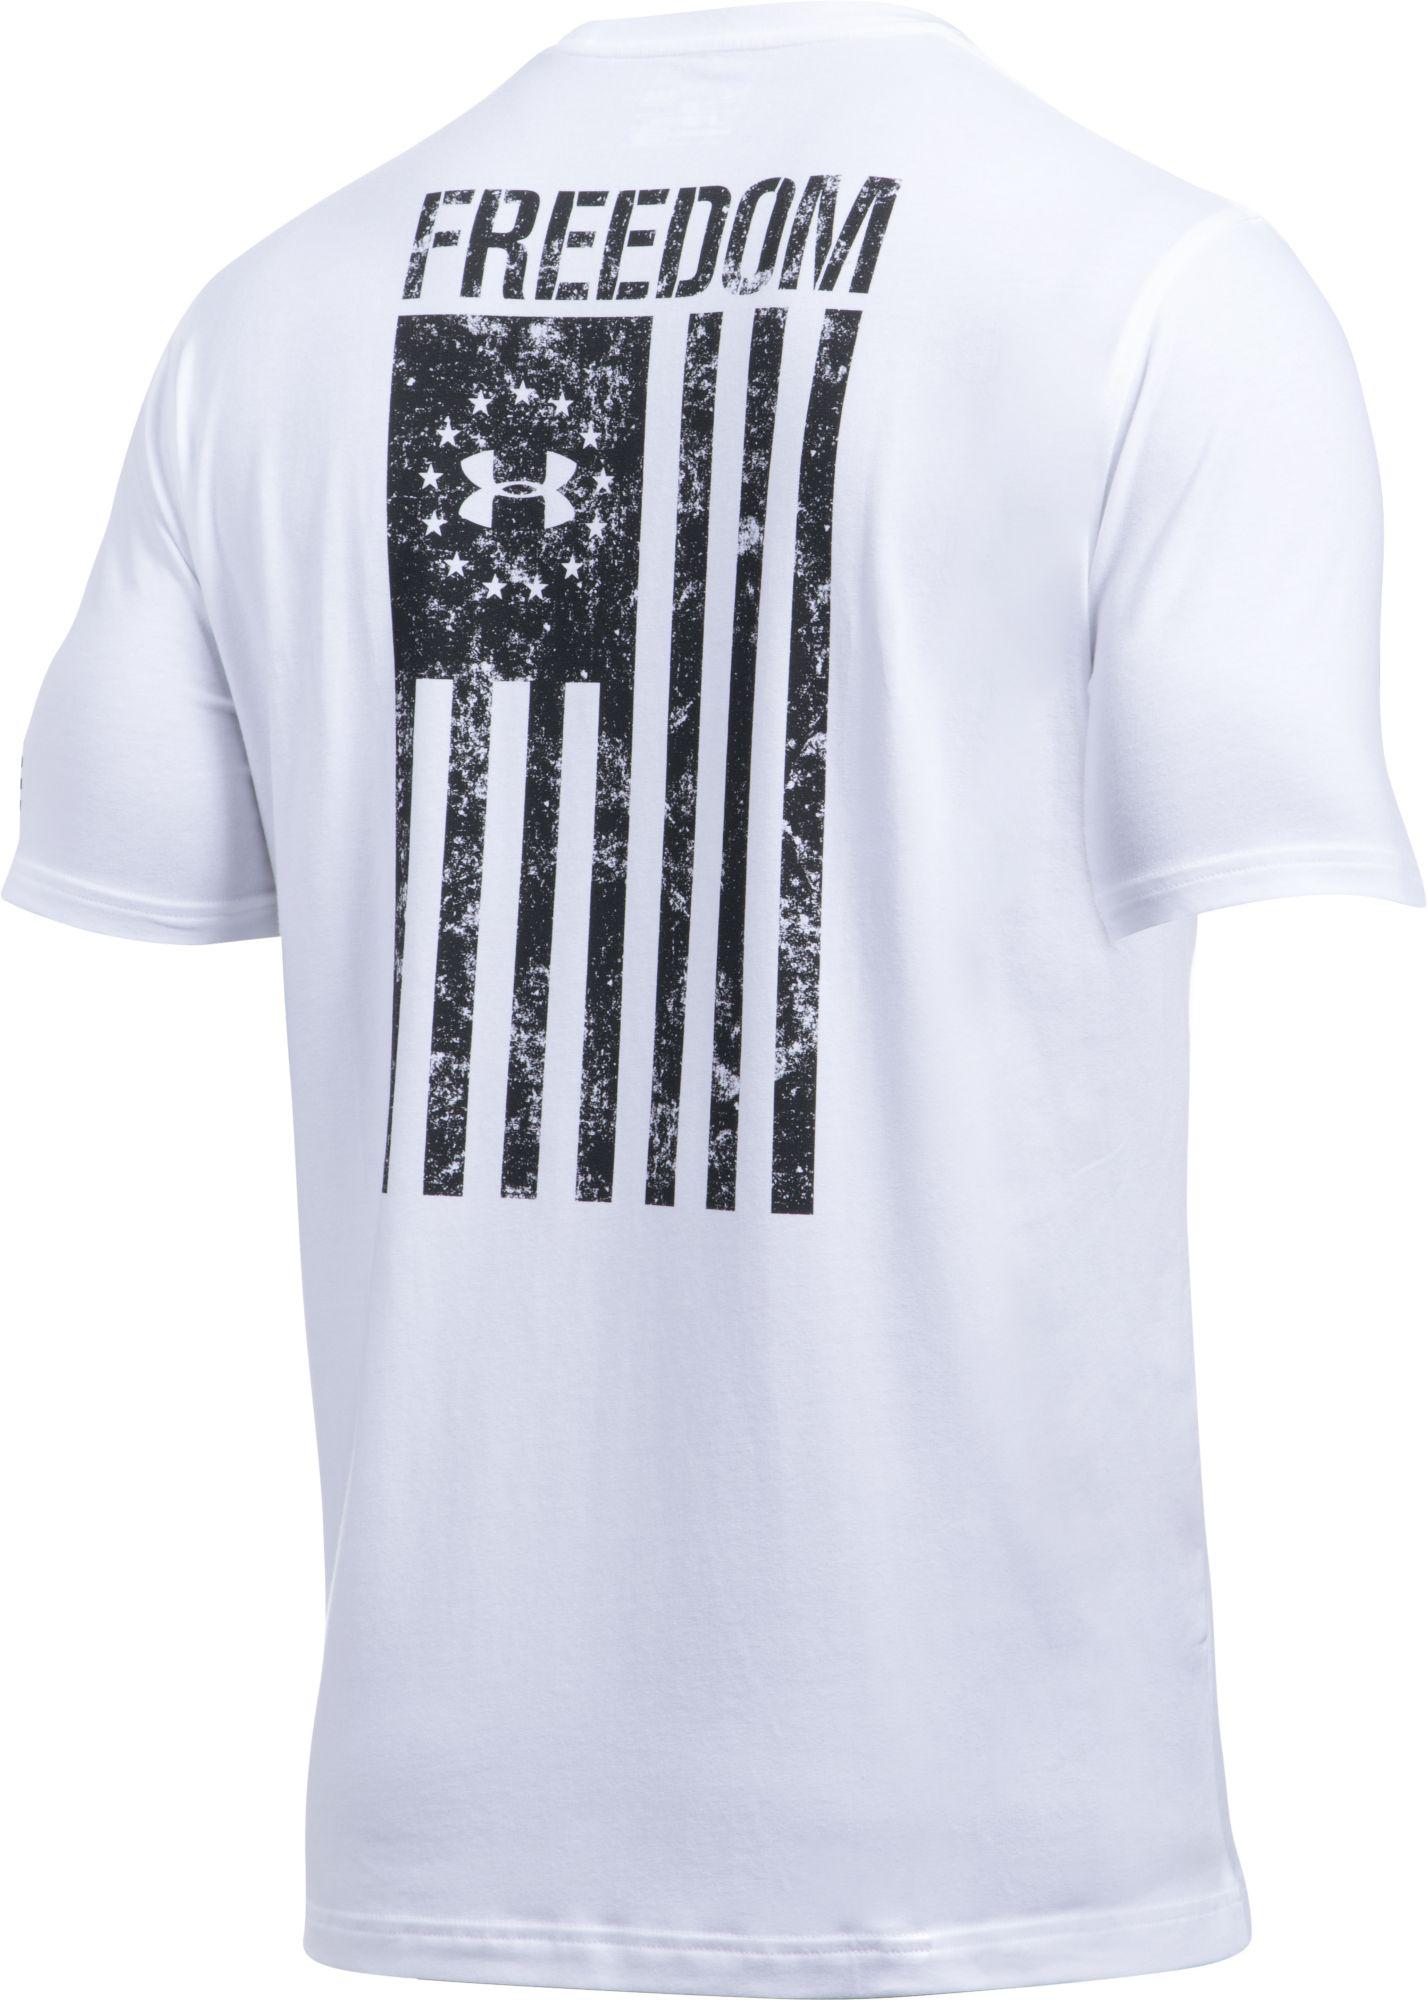 Under Armour Freedom Flag T-shirt in White for Men - Lyst